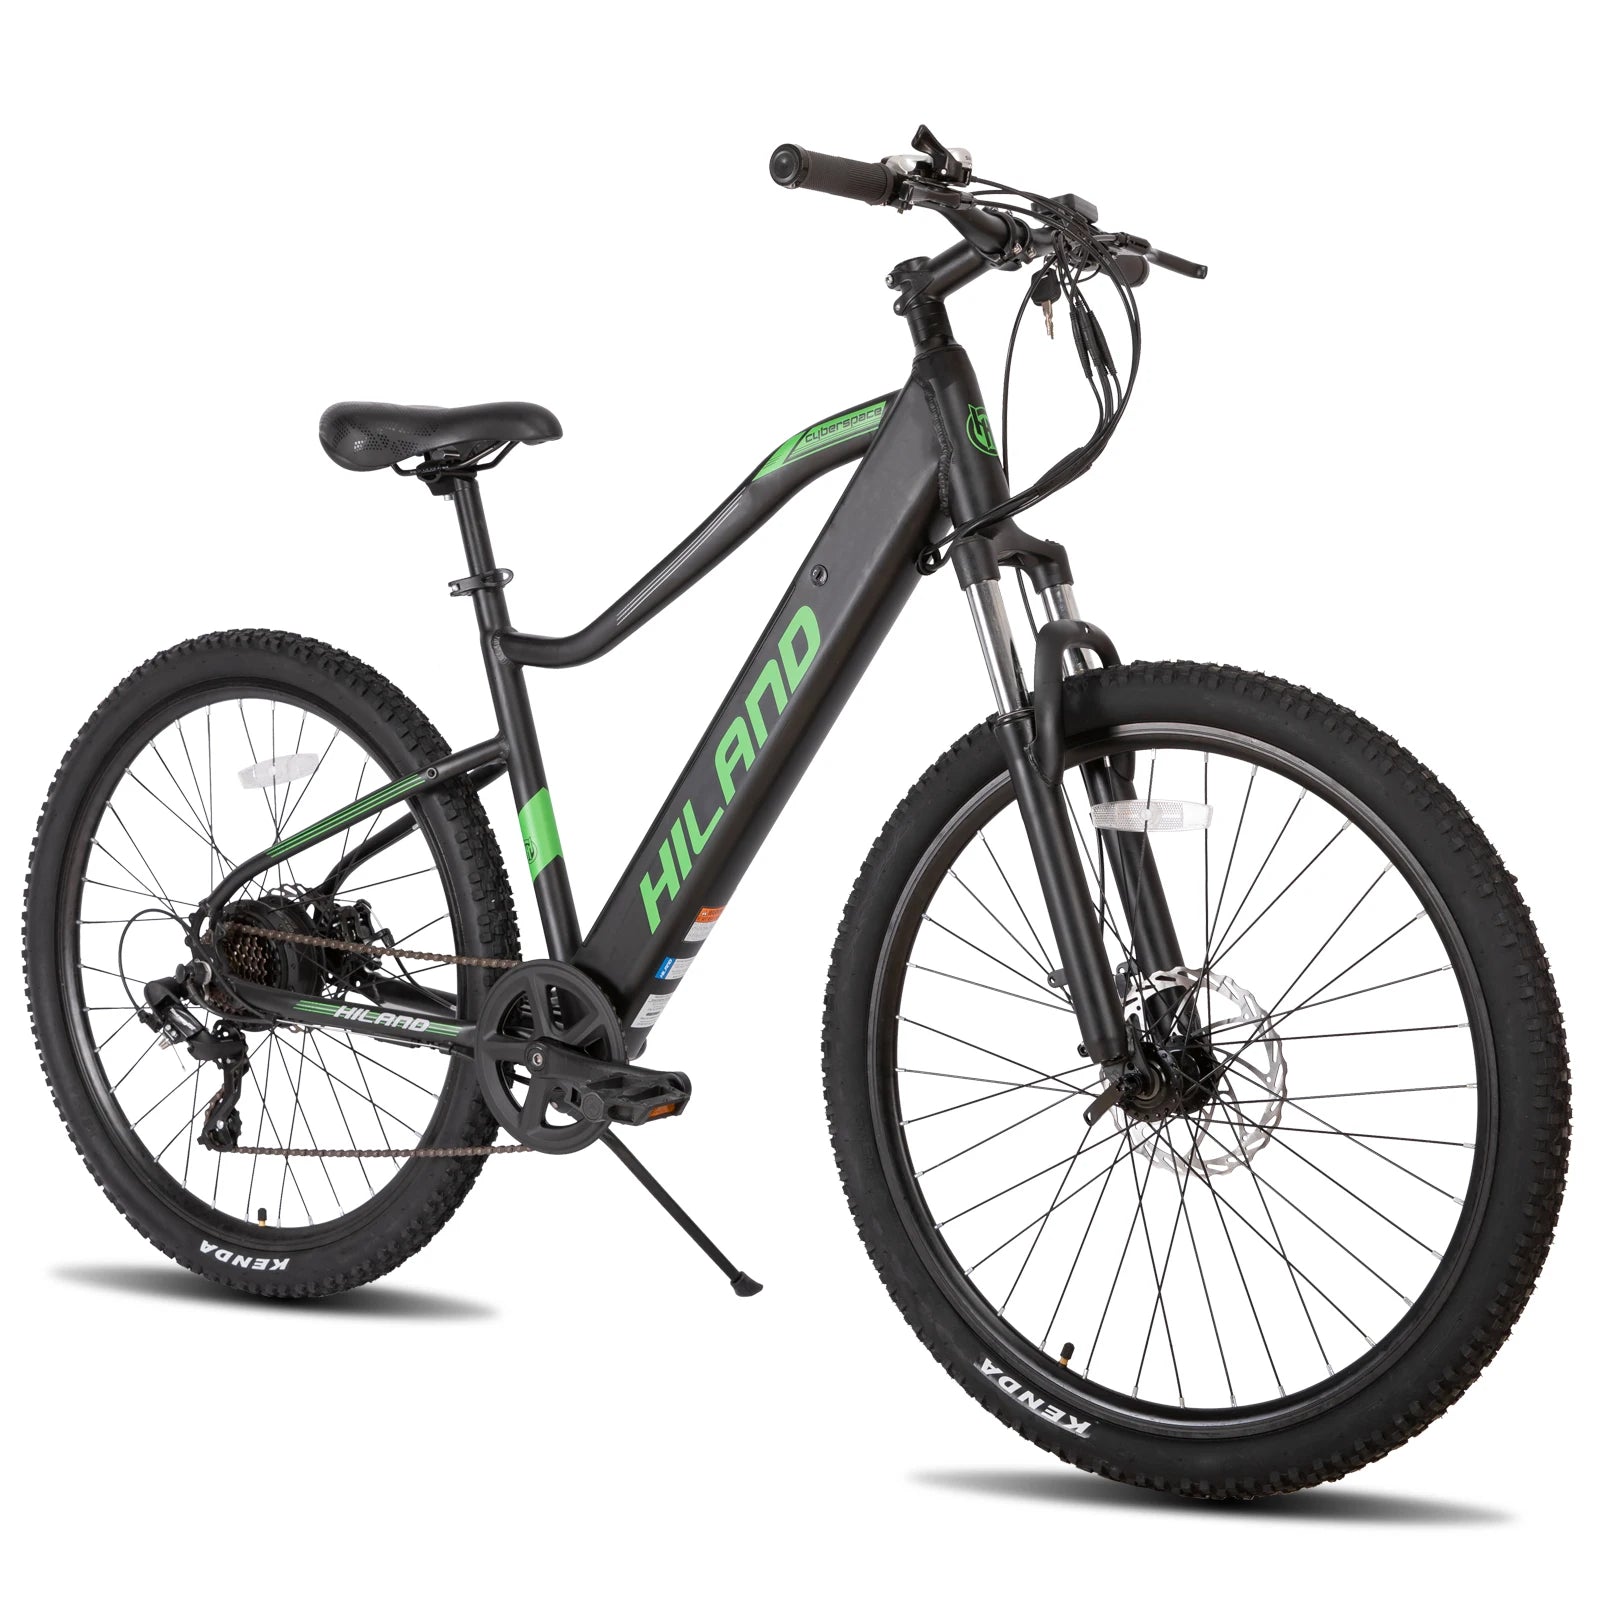 EPIC 750W Power - The Ultimate 26-Inch Electric Mountain Bike